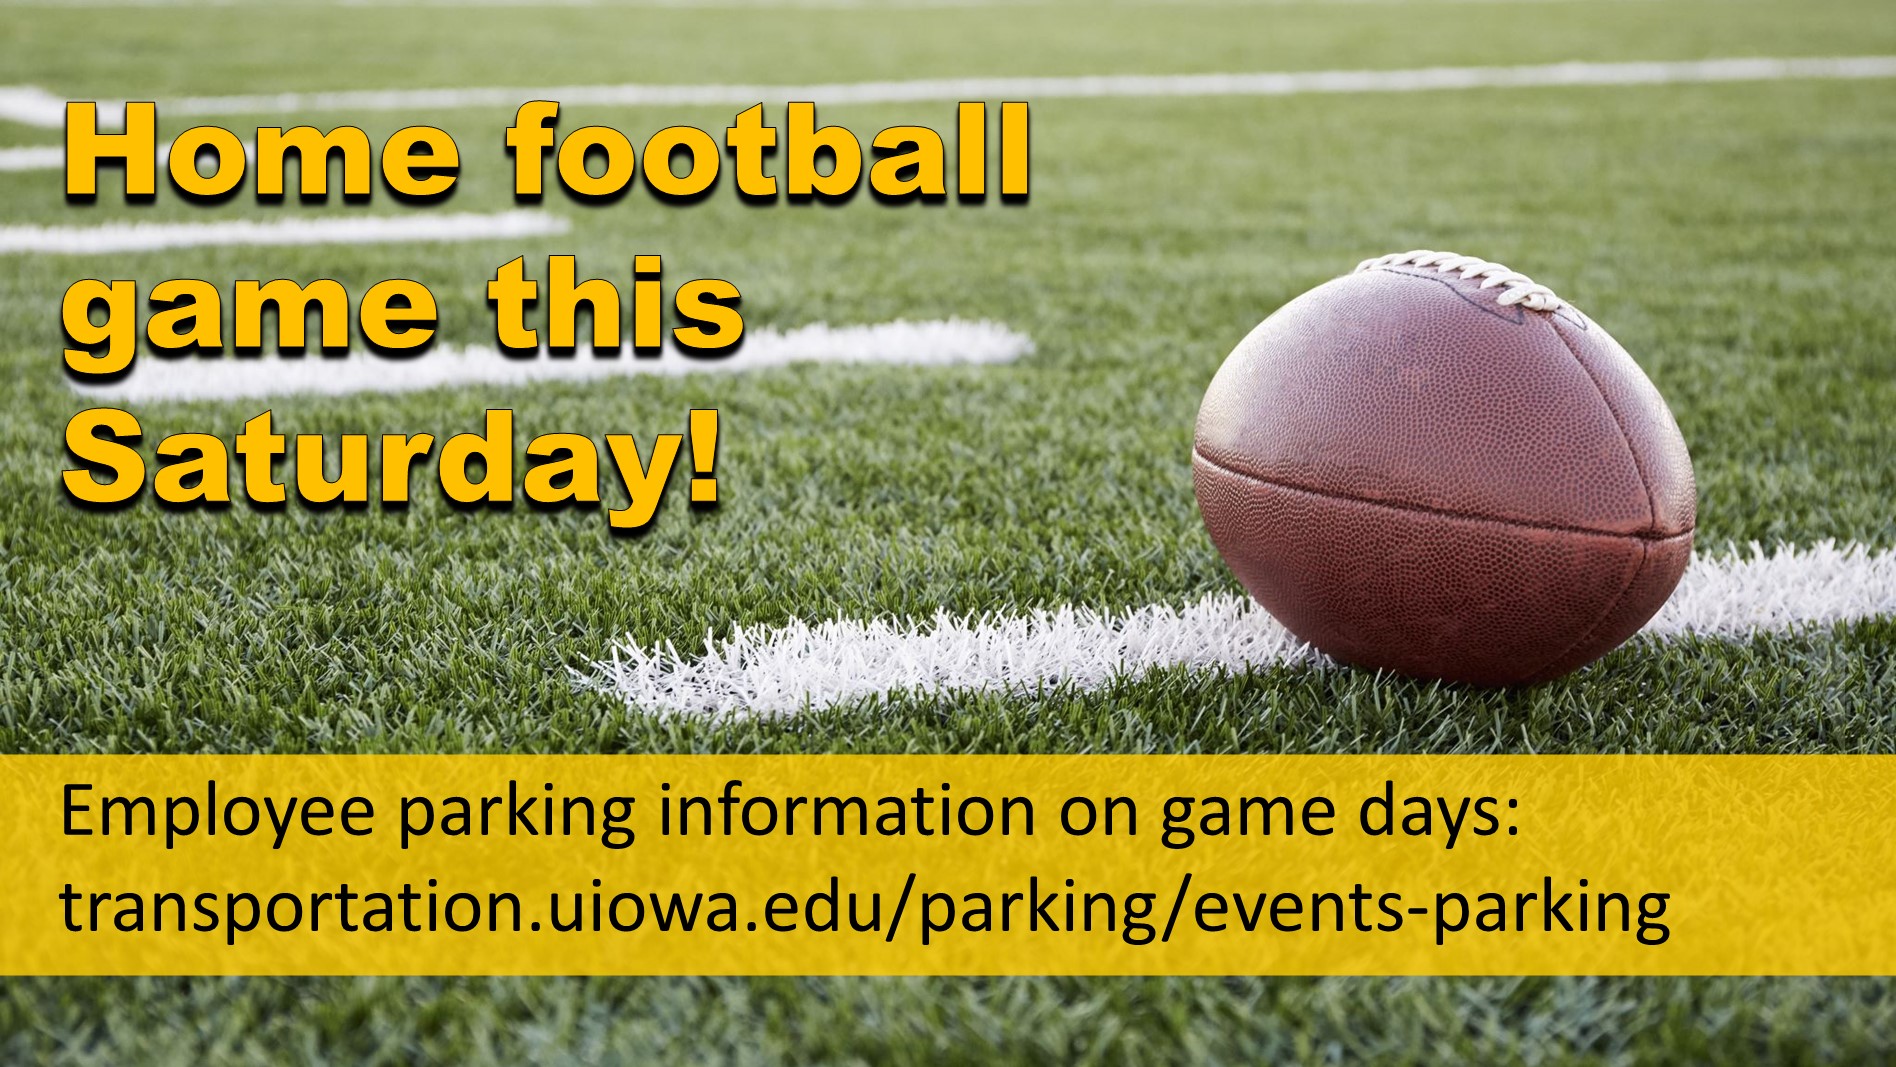 employee parking on home football game days